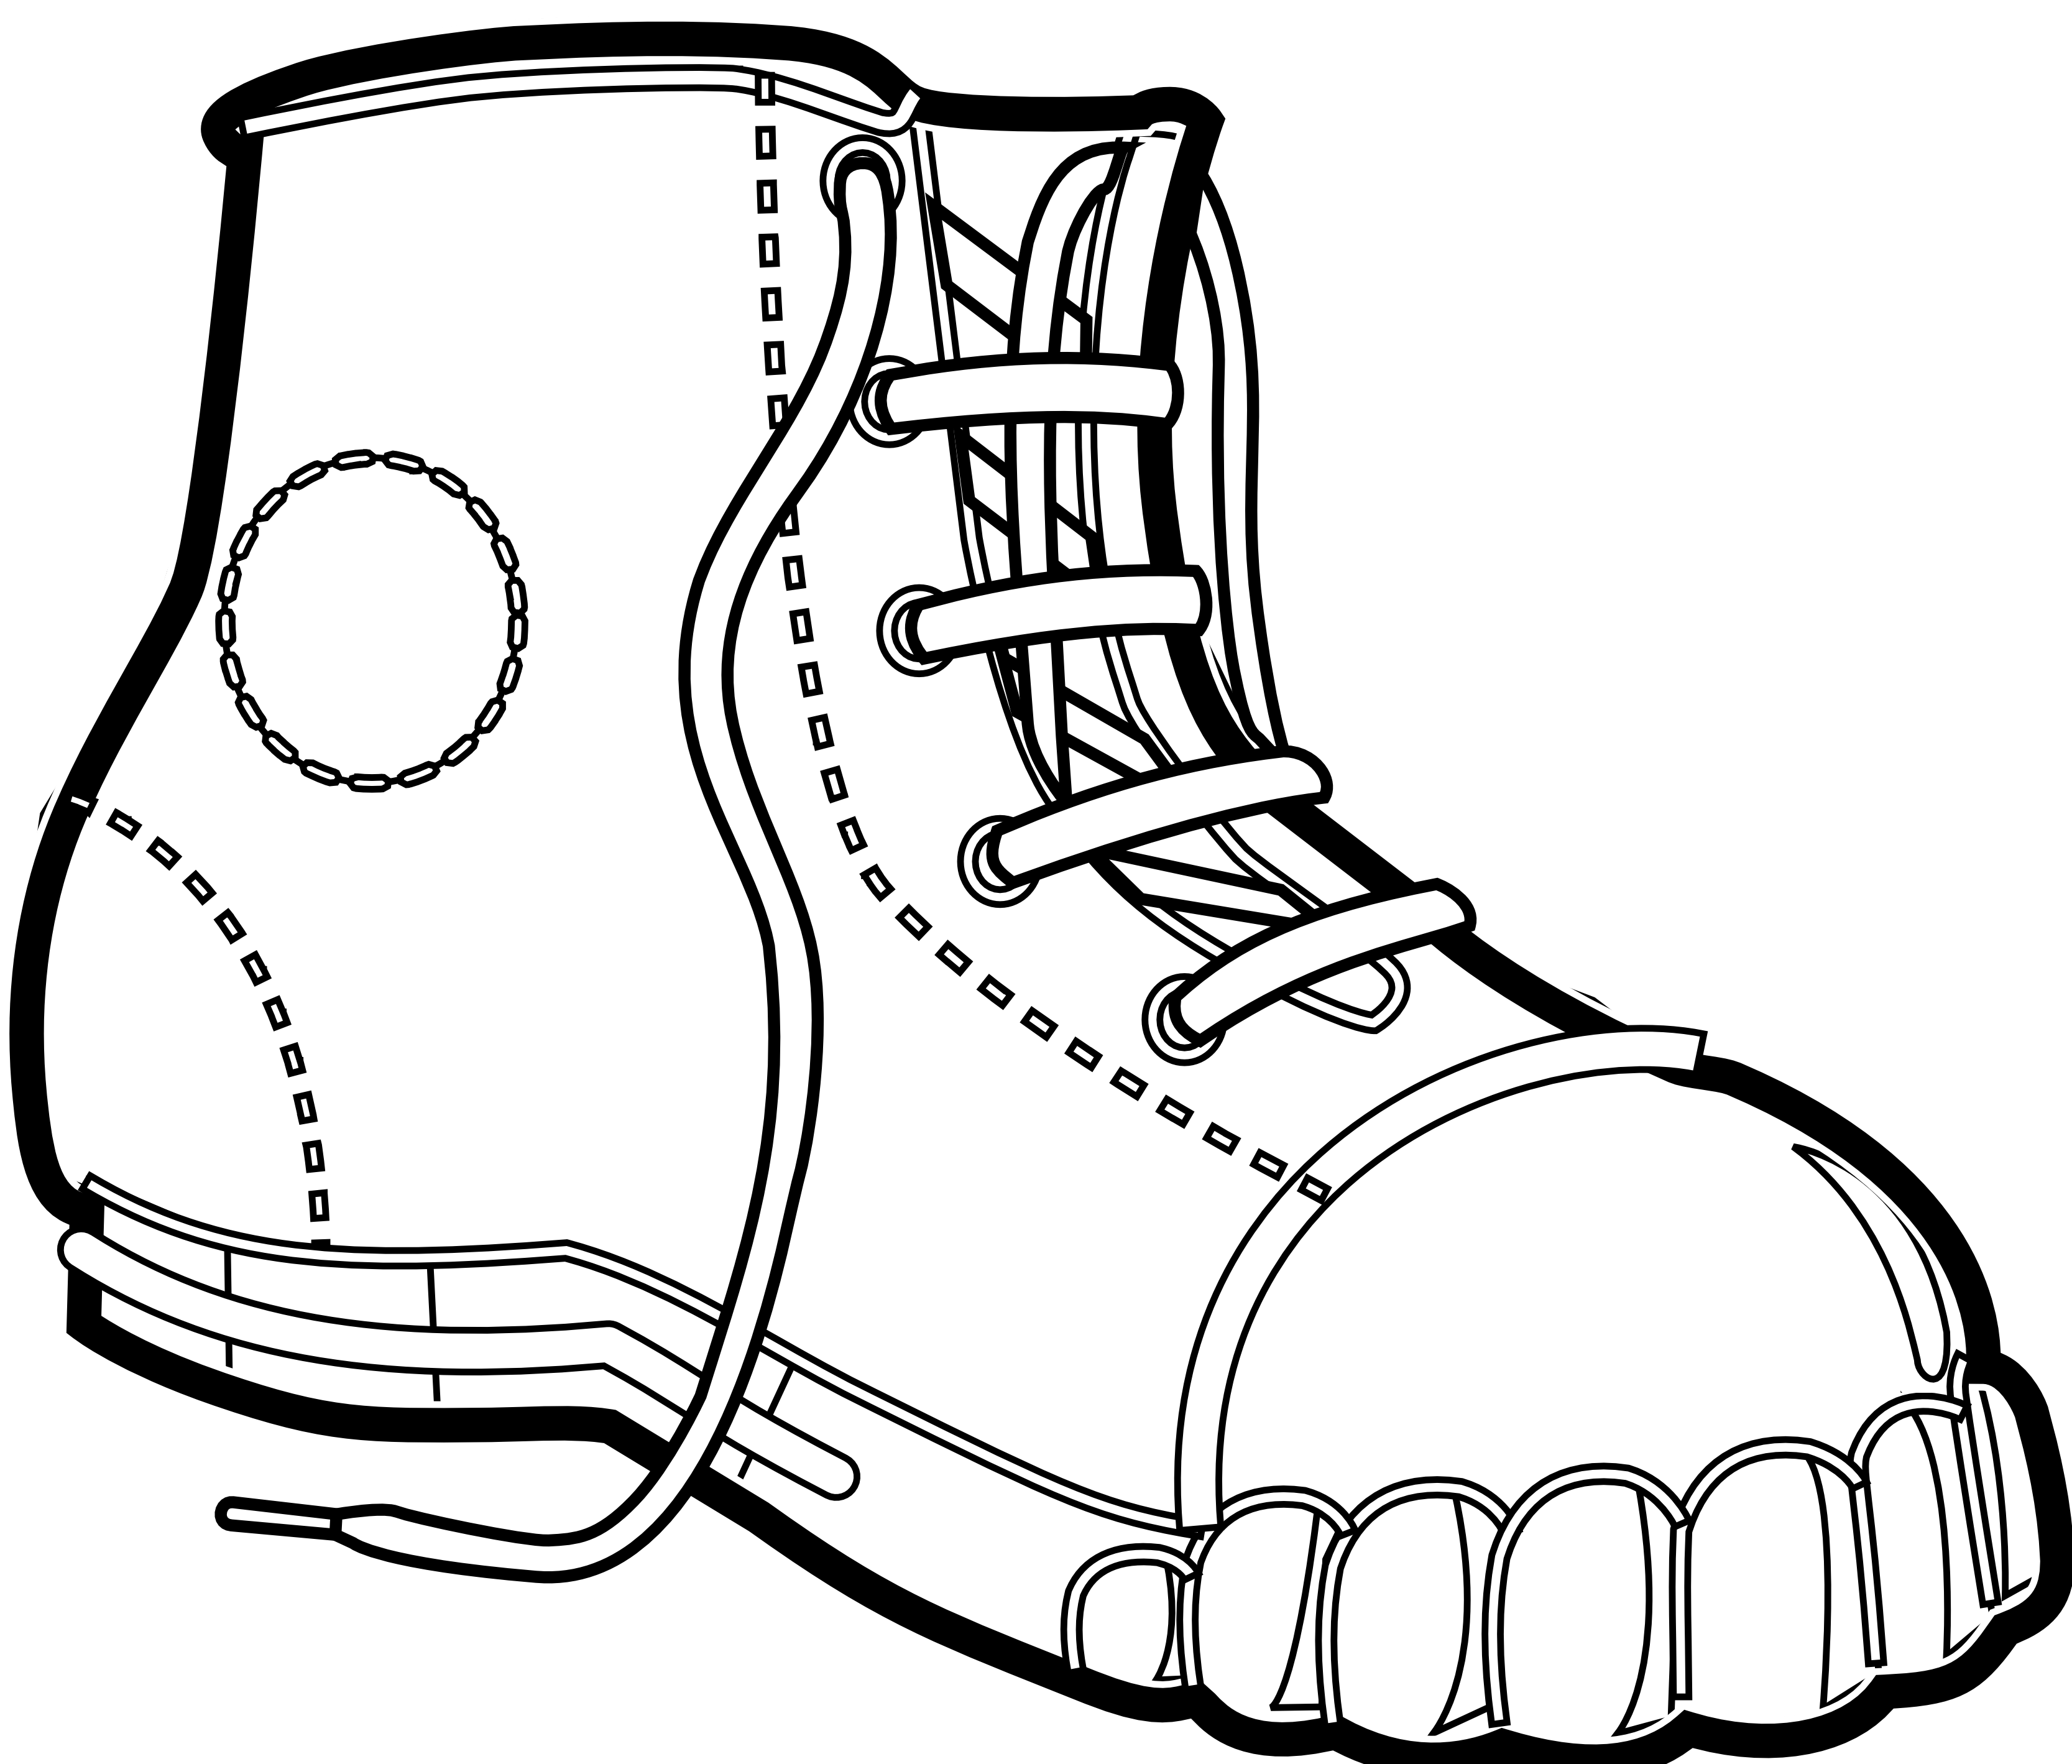  collection of hiking. Elbow clipart black and white